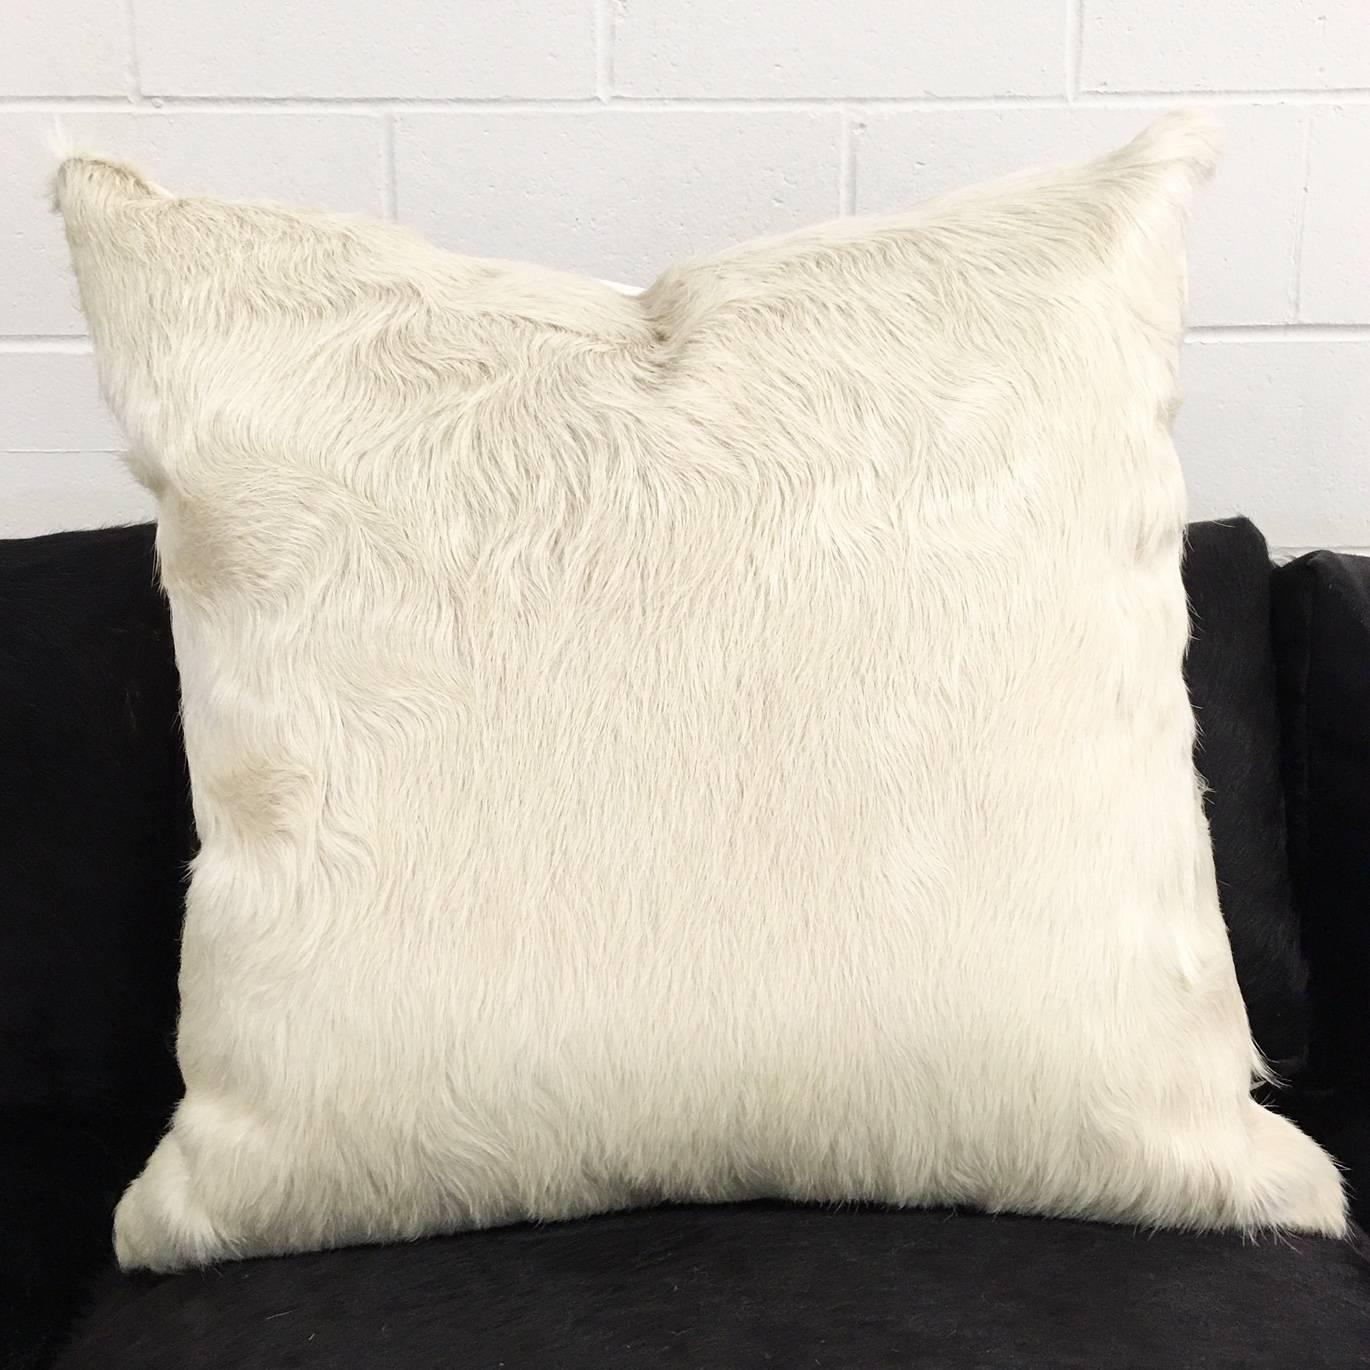 Forsyth cowhide pillows are simply the best. The most beautiful cowhides are selected, hand-cut, hand-stitched, and hand stuffed with the finest goose down. Each step is meticulously curated by Saint Louis based Forsyth